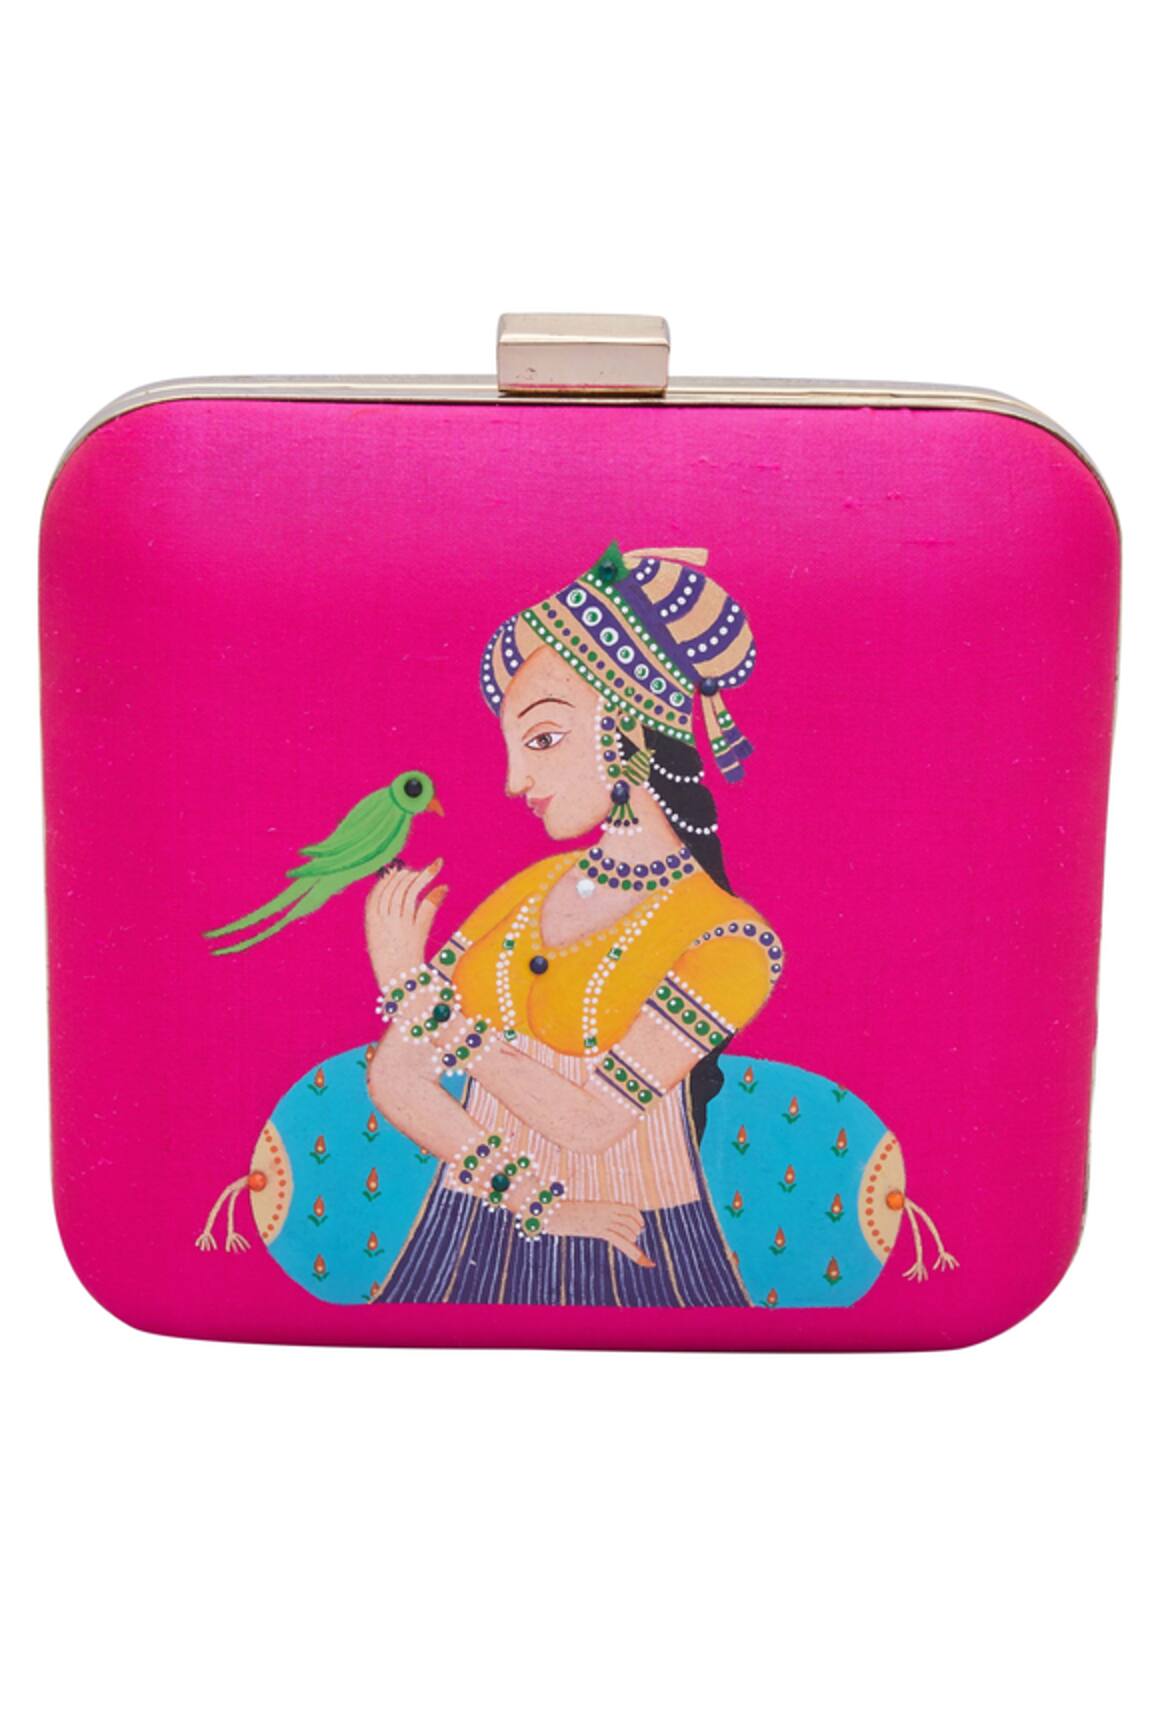 Crazy Palette Hand painted box clutch